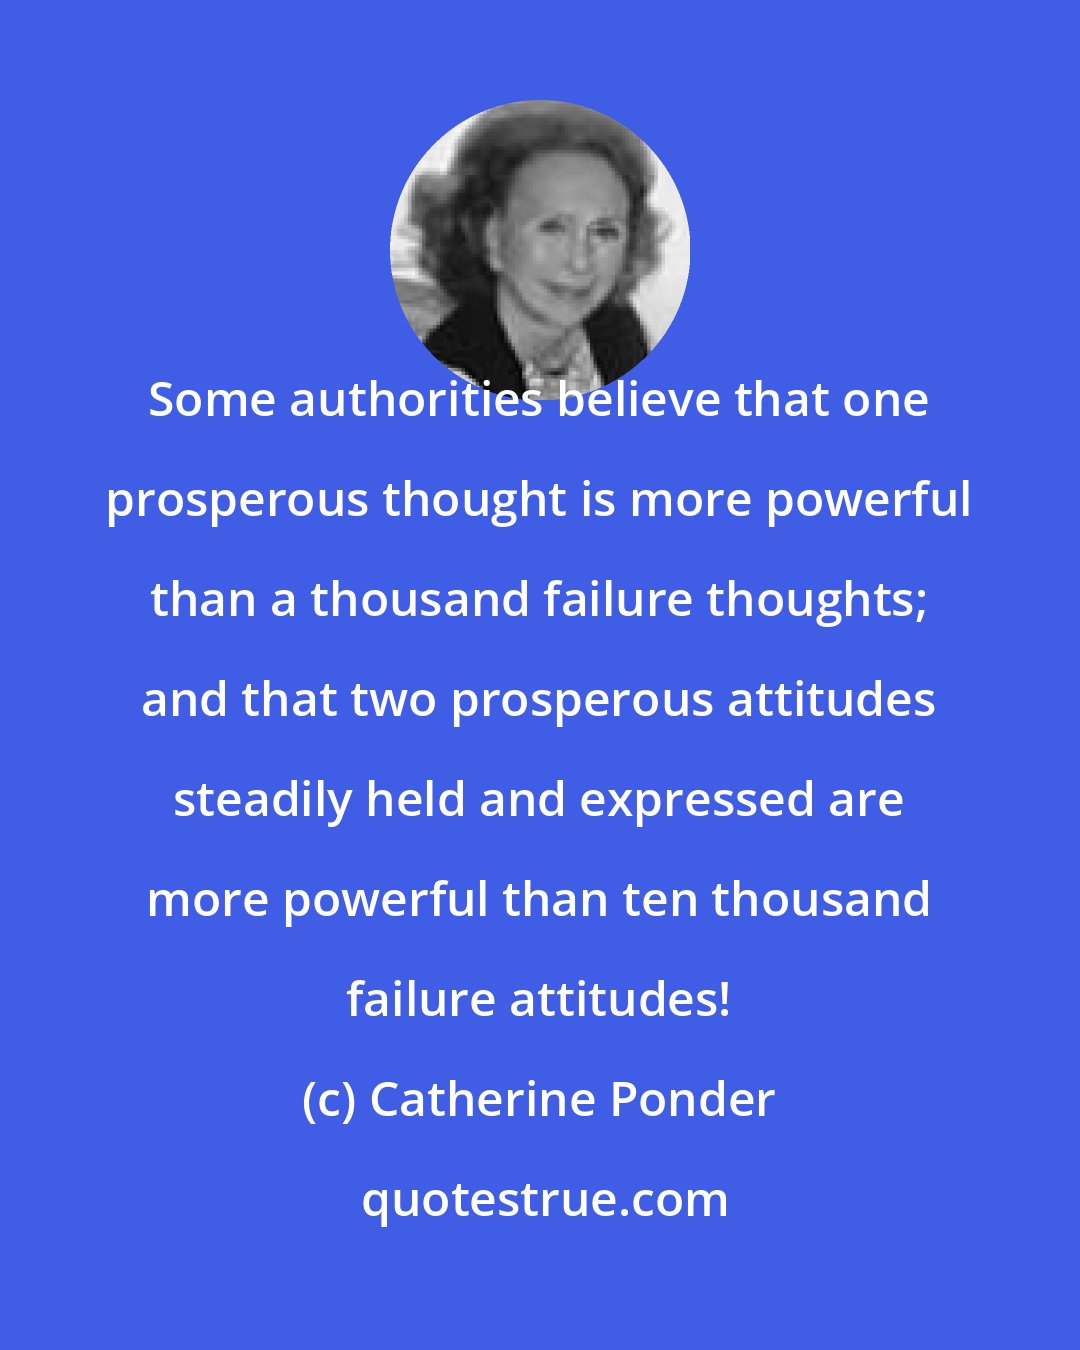 Catherine Ponder: Some authorities believe that one prosperous thought is more powerful than a thousand failure thoughts; and that two prosperous attitudes steadily held and expressed are more powerful than ten thousand failure attitudes!